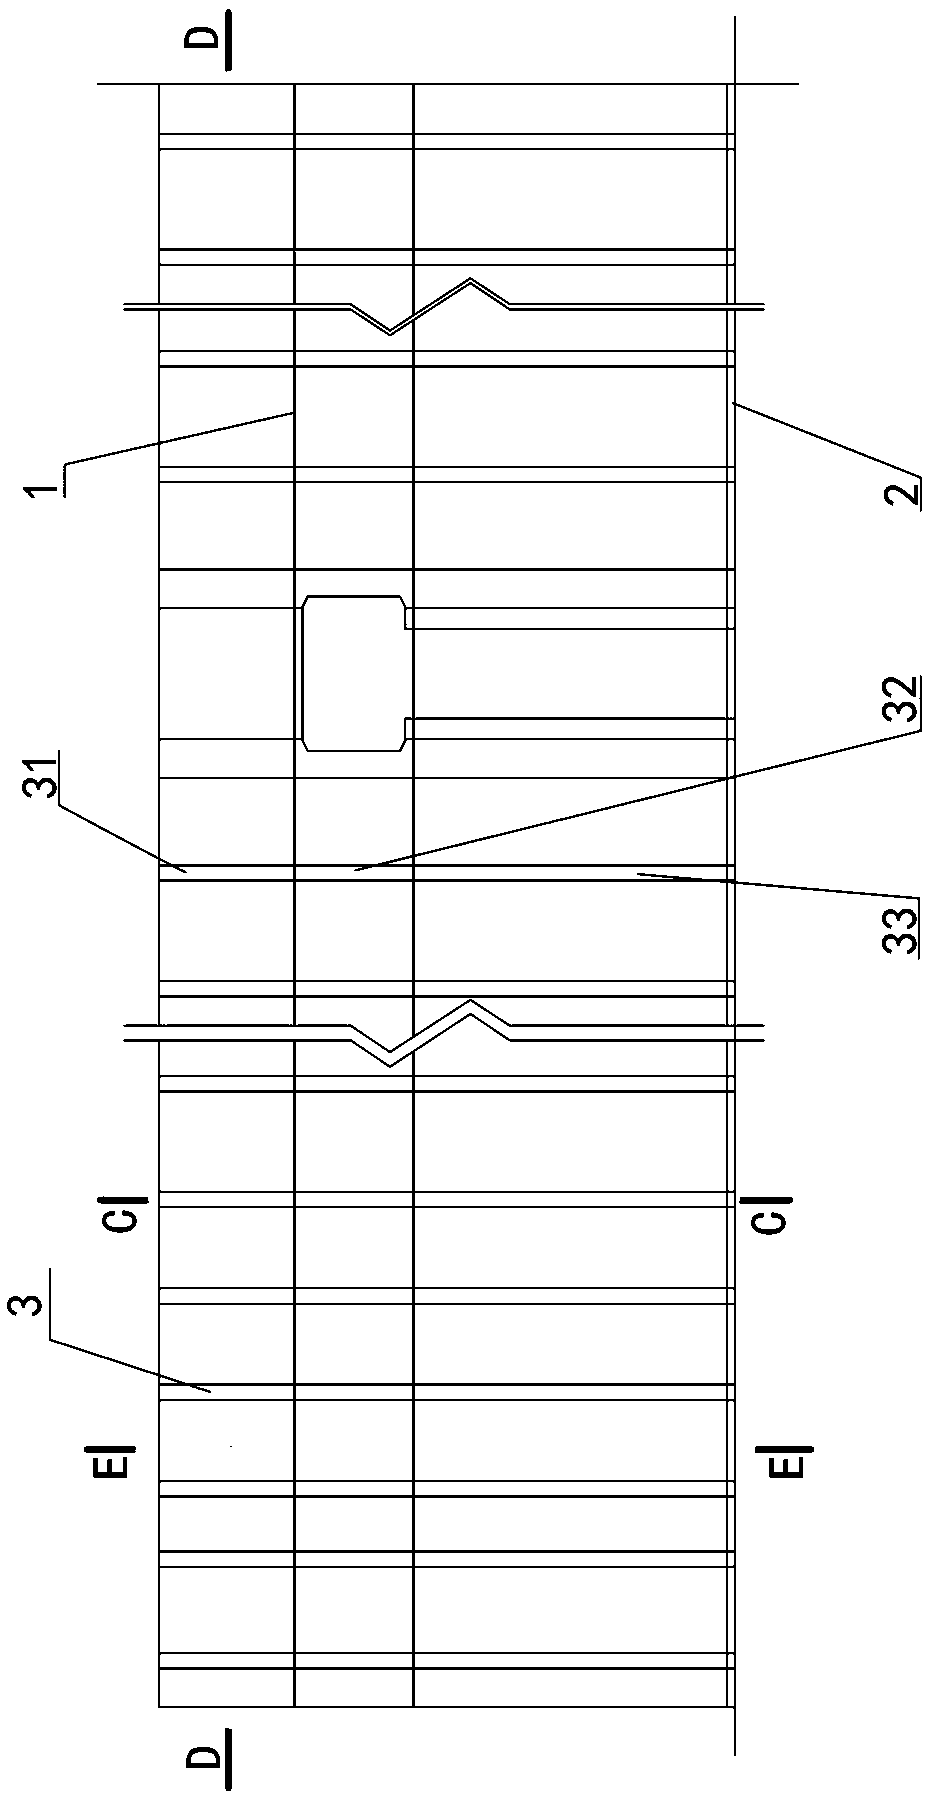 Wide-span girder main beam structure, combined formwork system and construction method for cable-stayed bridge